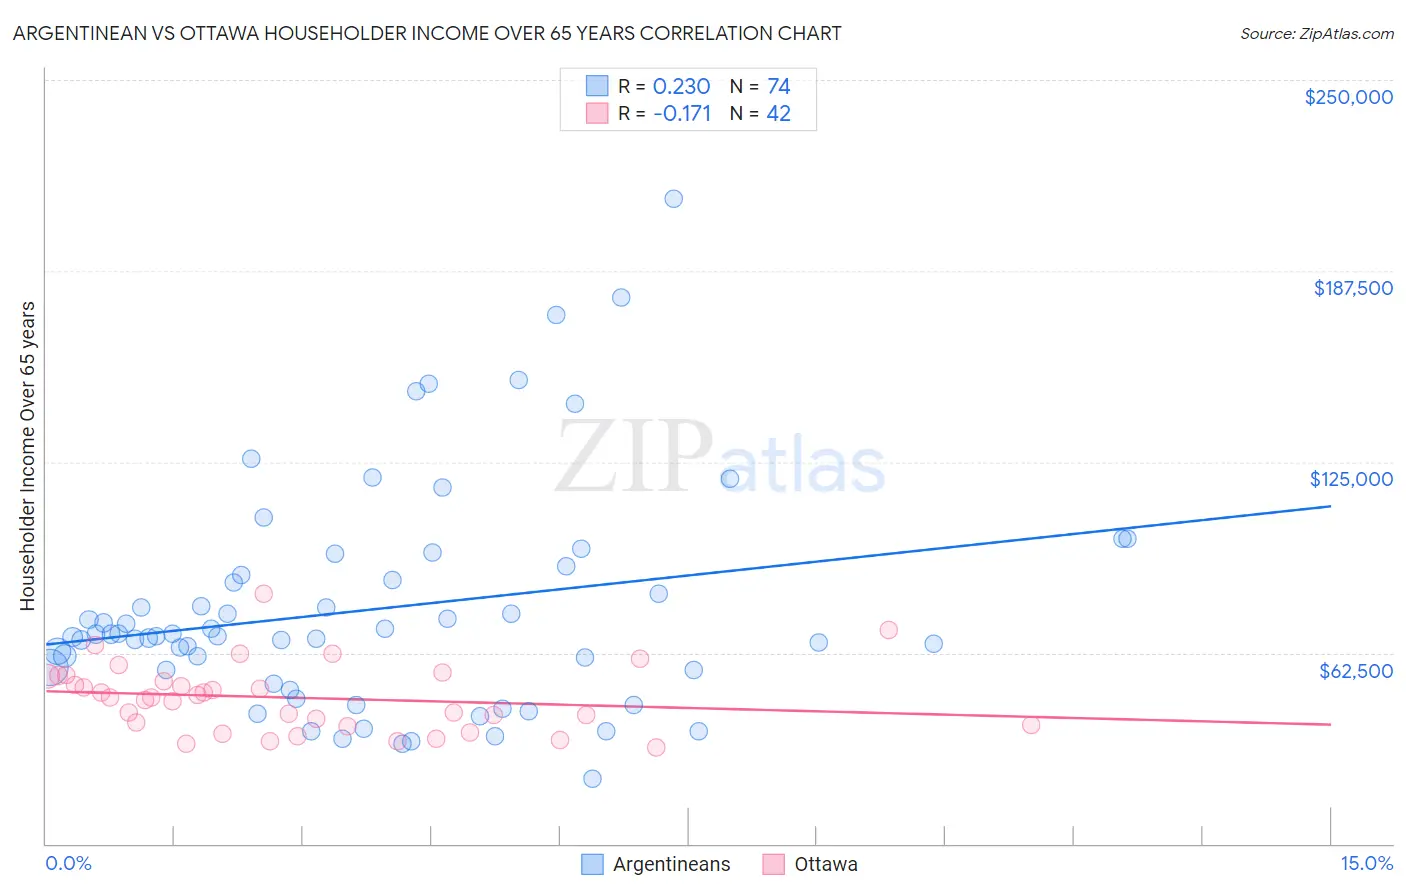 Argentinean vs Ottawa Householder Income Over 65 years